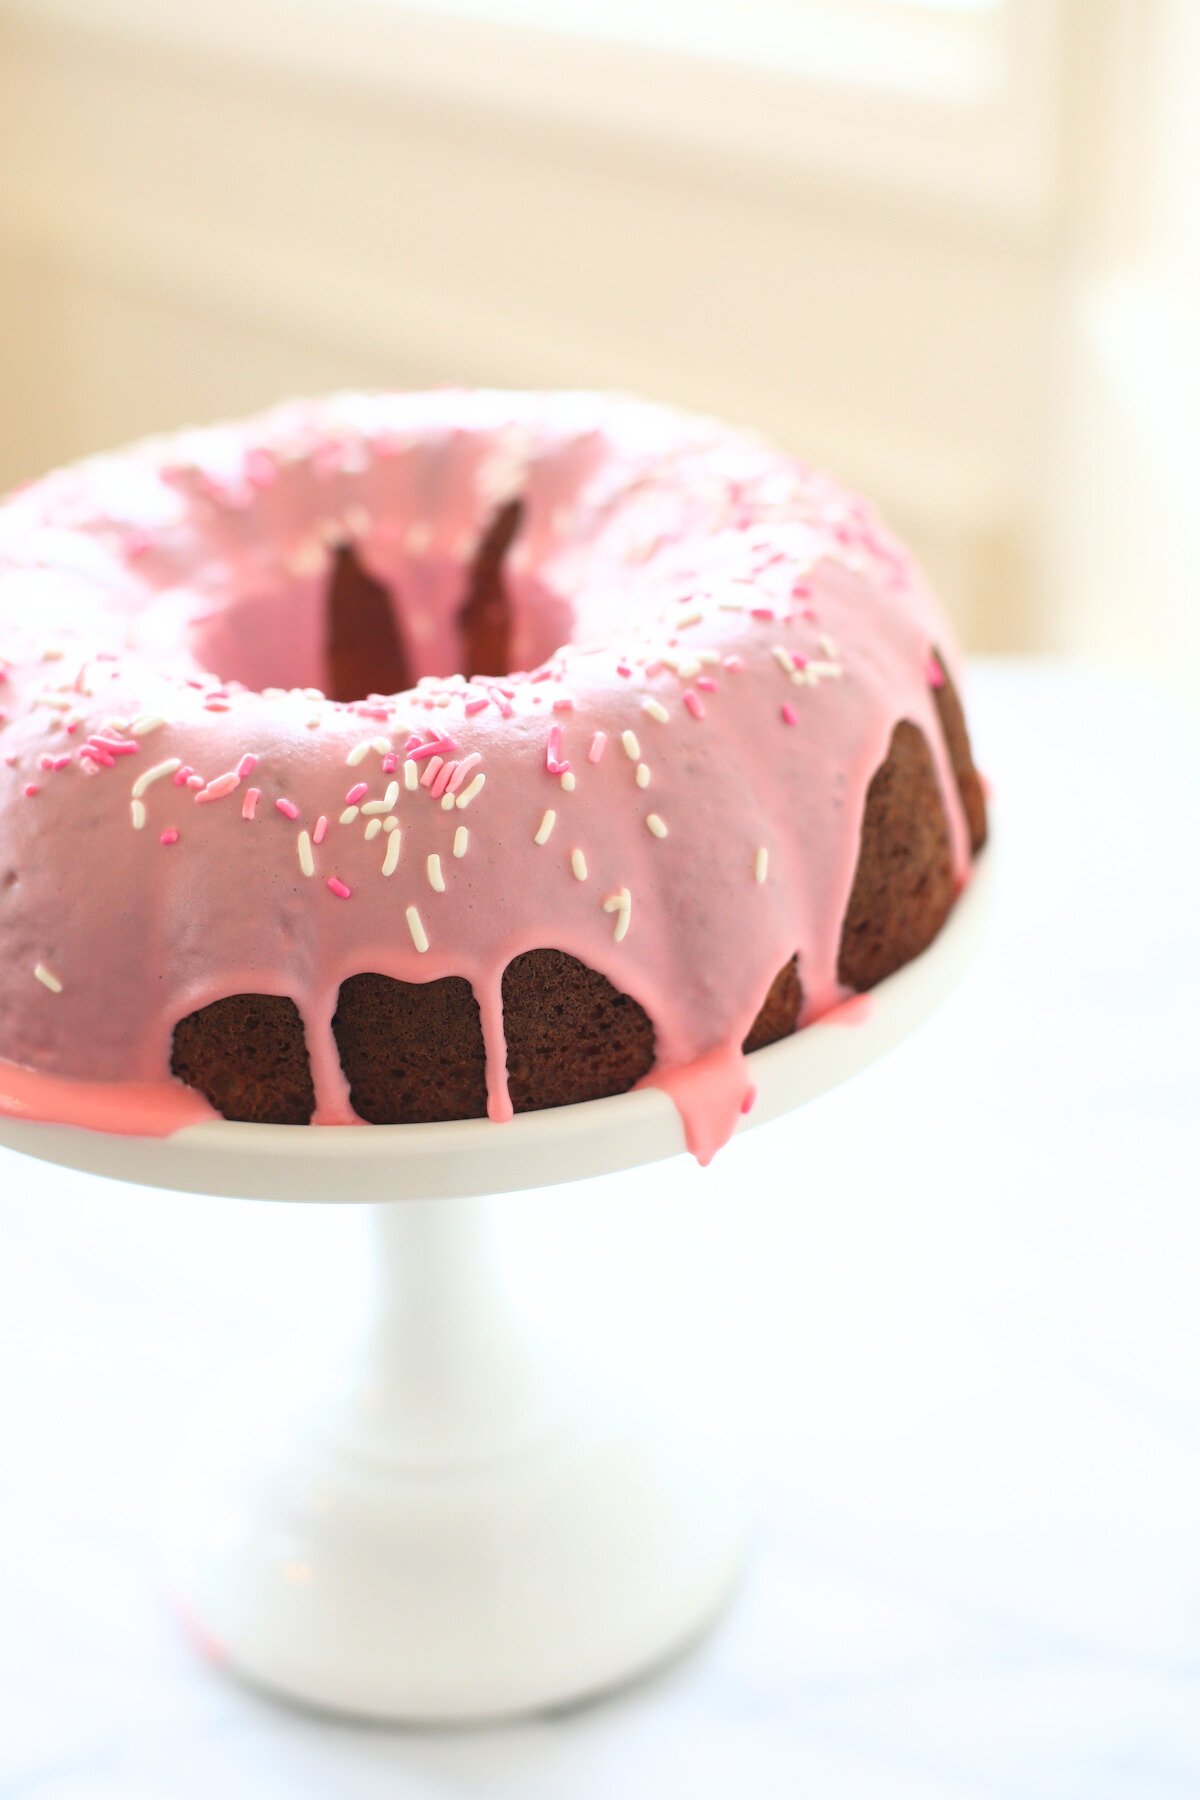 A donut cake on a white pedestal stand, decorated with pink frosting and sprinkles.